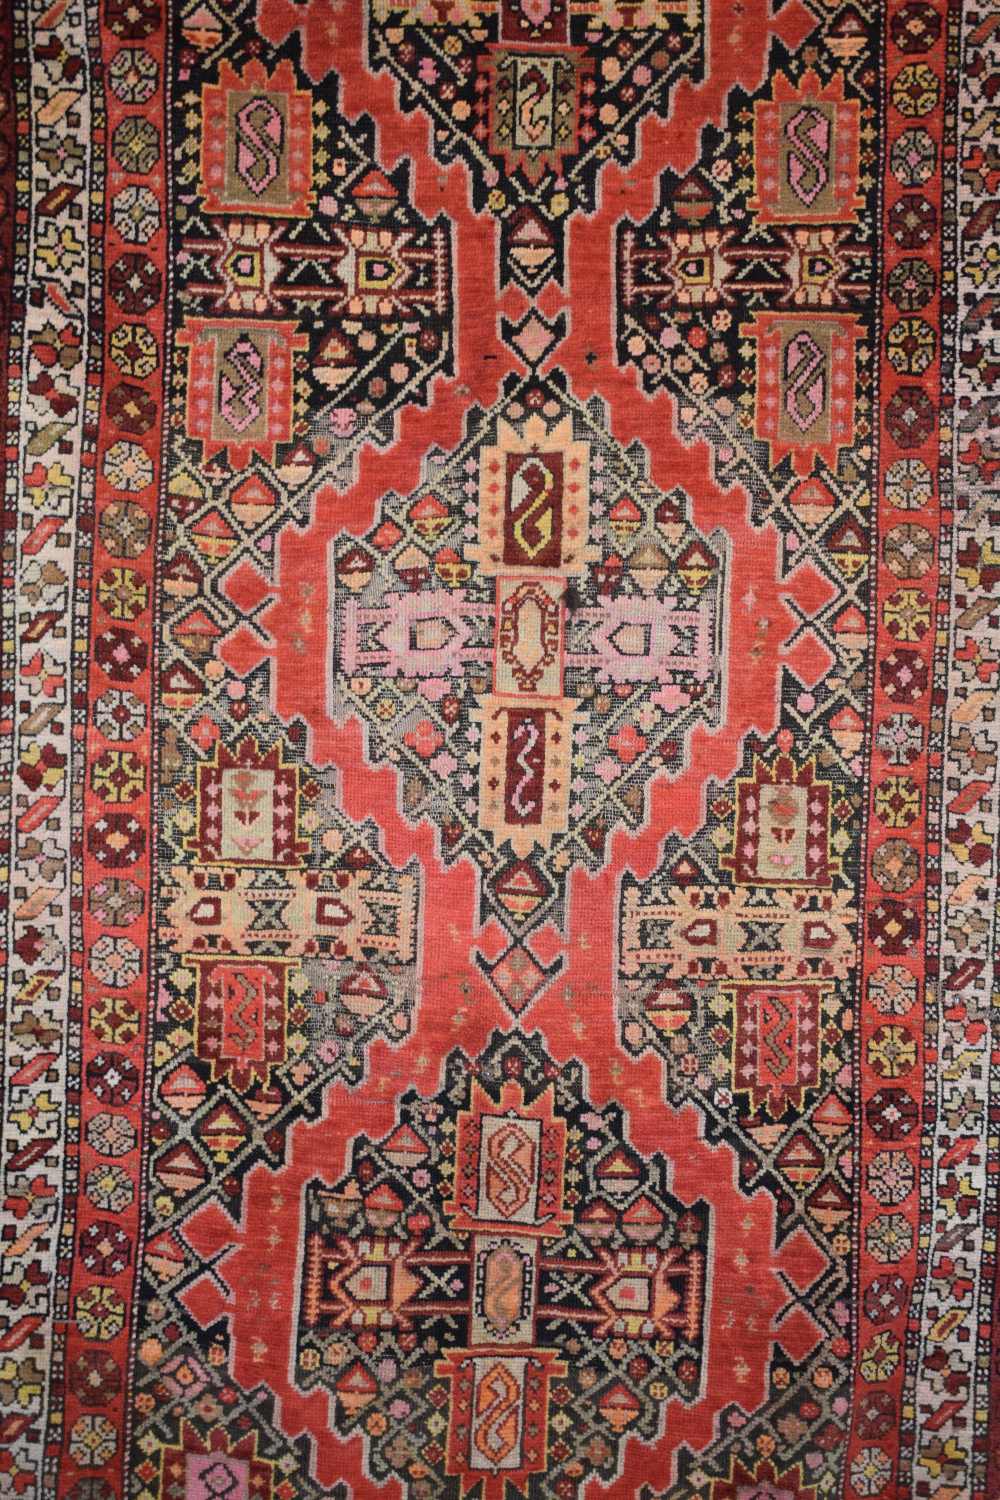 Karabakh rug, south west Caucasus, circa 1930s-40s, 10ft. 6in. X 4ft. 4in. 3.20m. X 1.32m. Date 1949 - Image 12 of 13